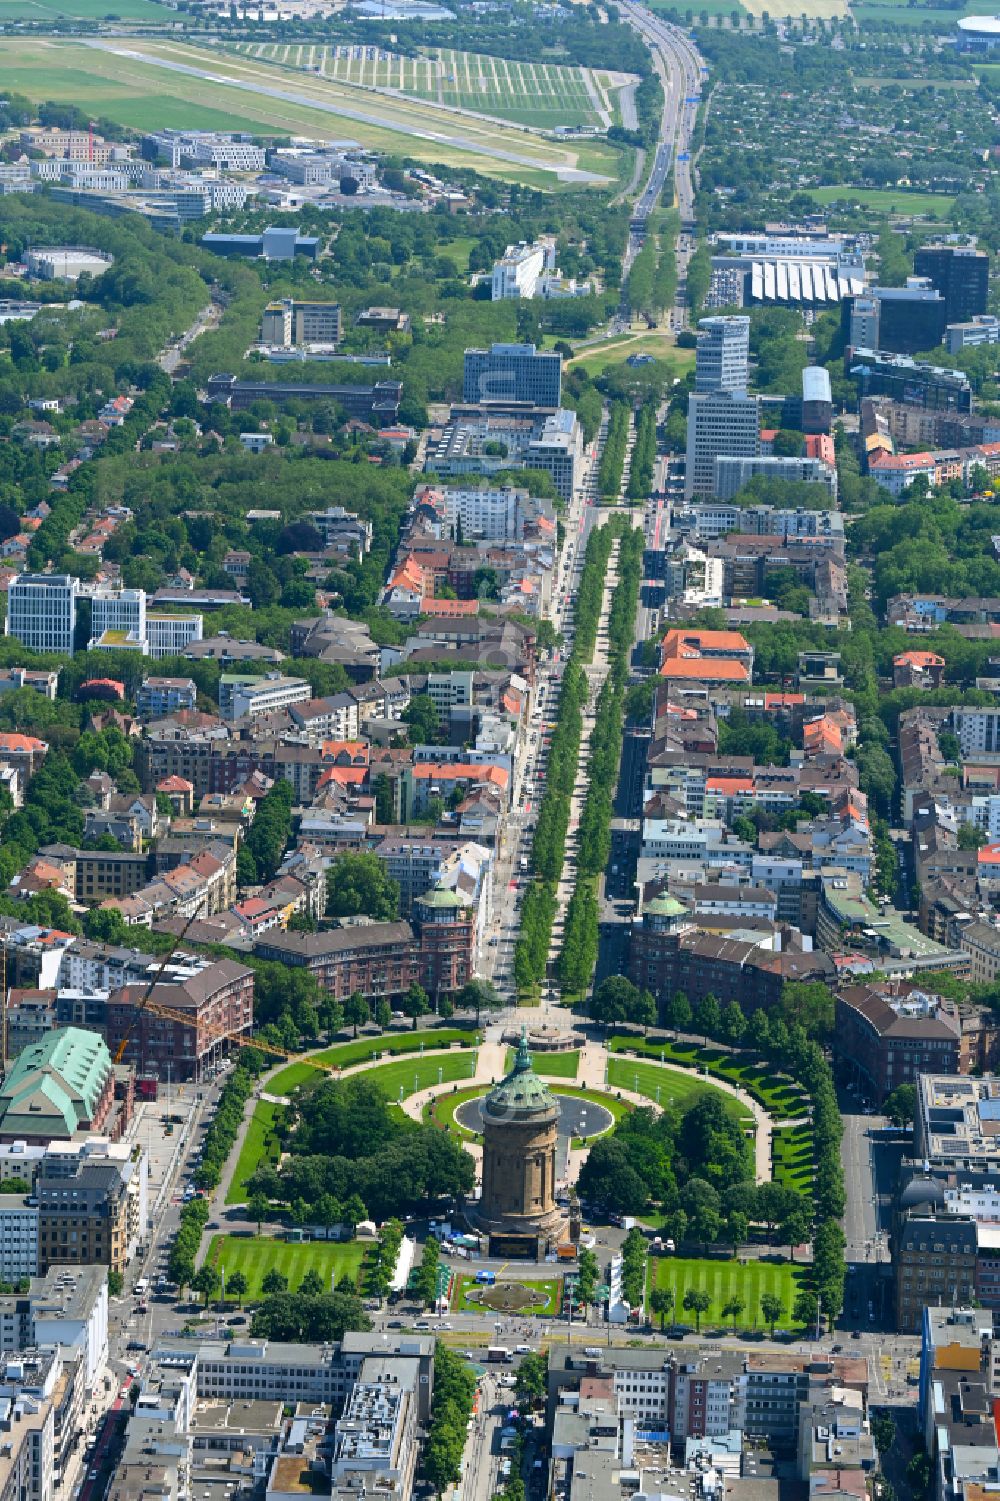 Mannheim from the bird's eye view: Building of industrial monument water tower Mannheimer Wasserturm on place Friedrichsplatz in the district Quadrate in Mannheim in the state Baden-Wurttemberg, Germany